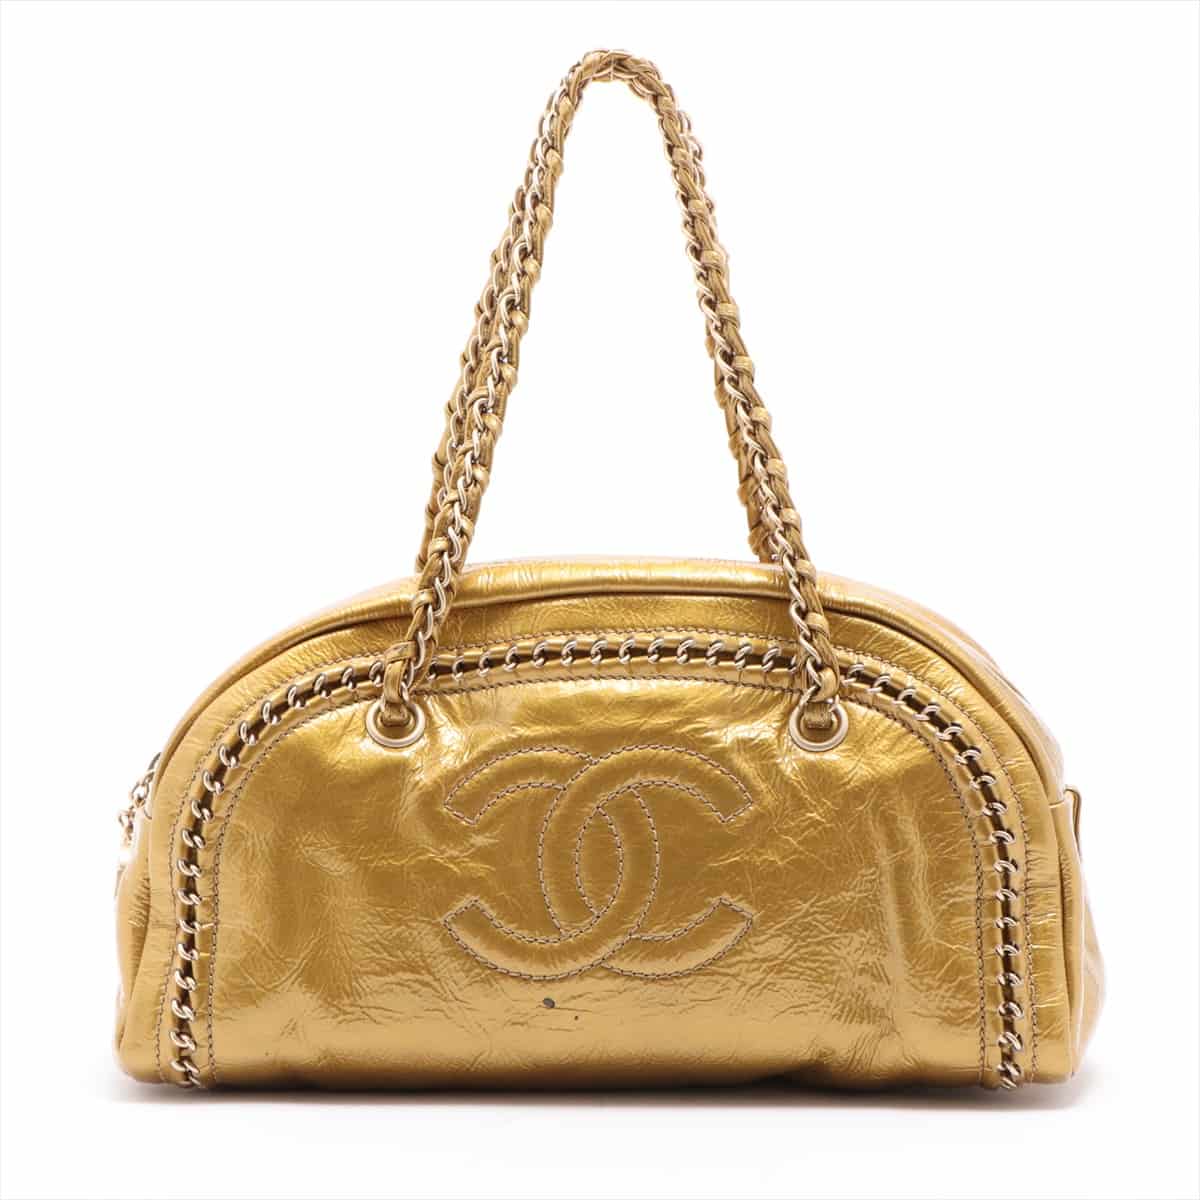 Chanel Luxury Line Patent leather Chain shoulder bag Gold Gold Metal fittings 11XXXXXX